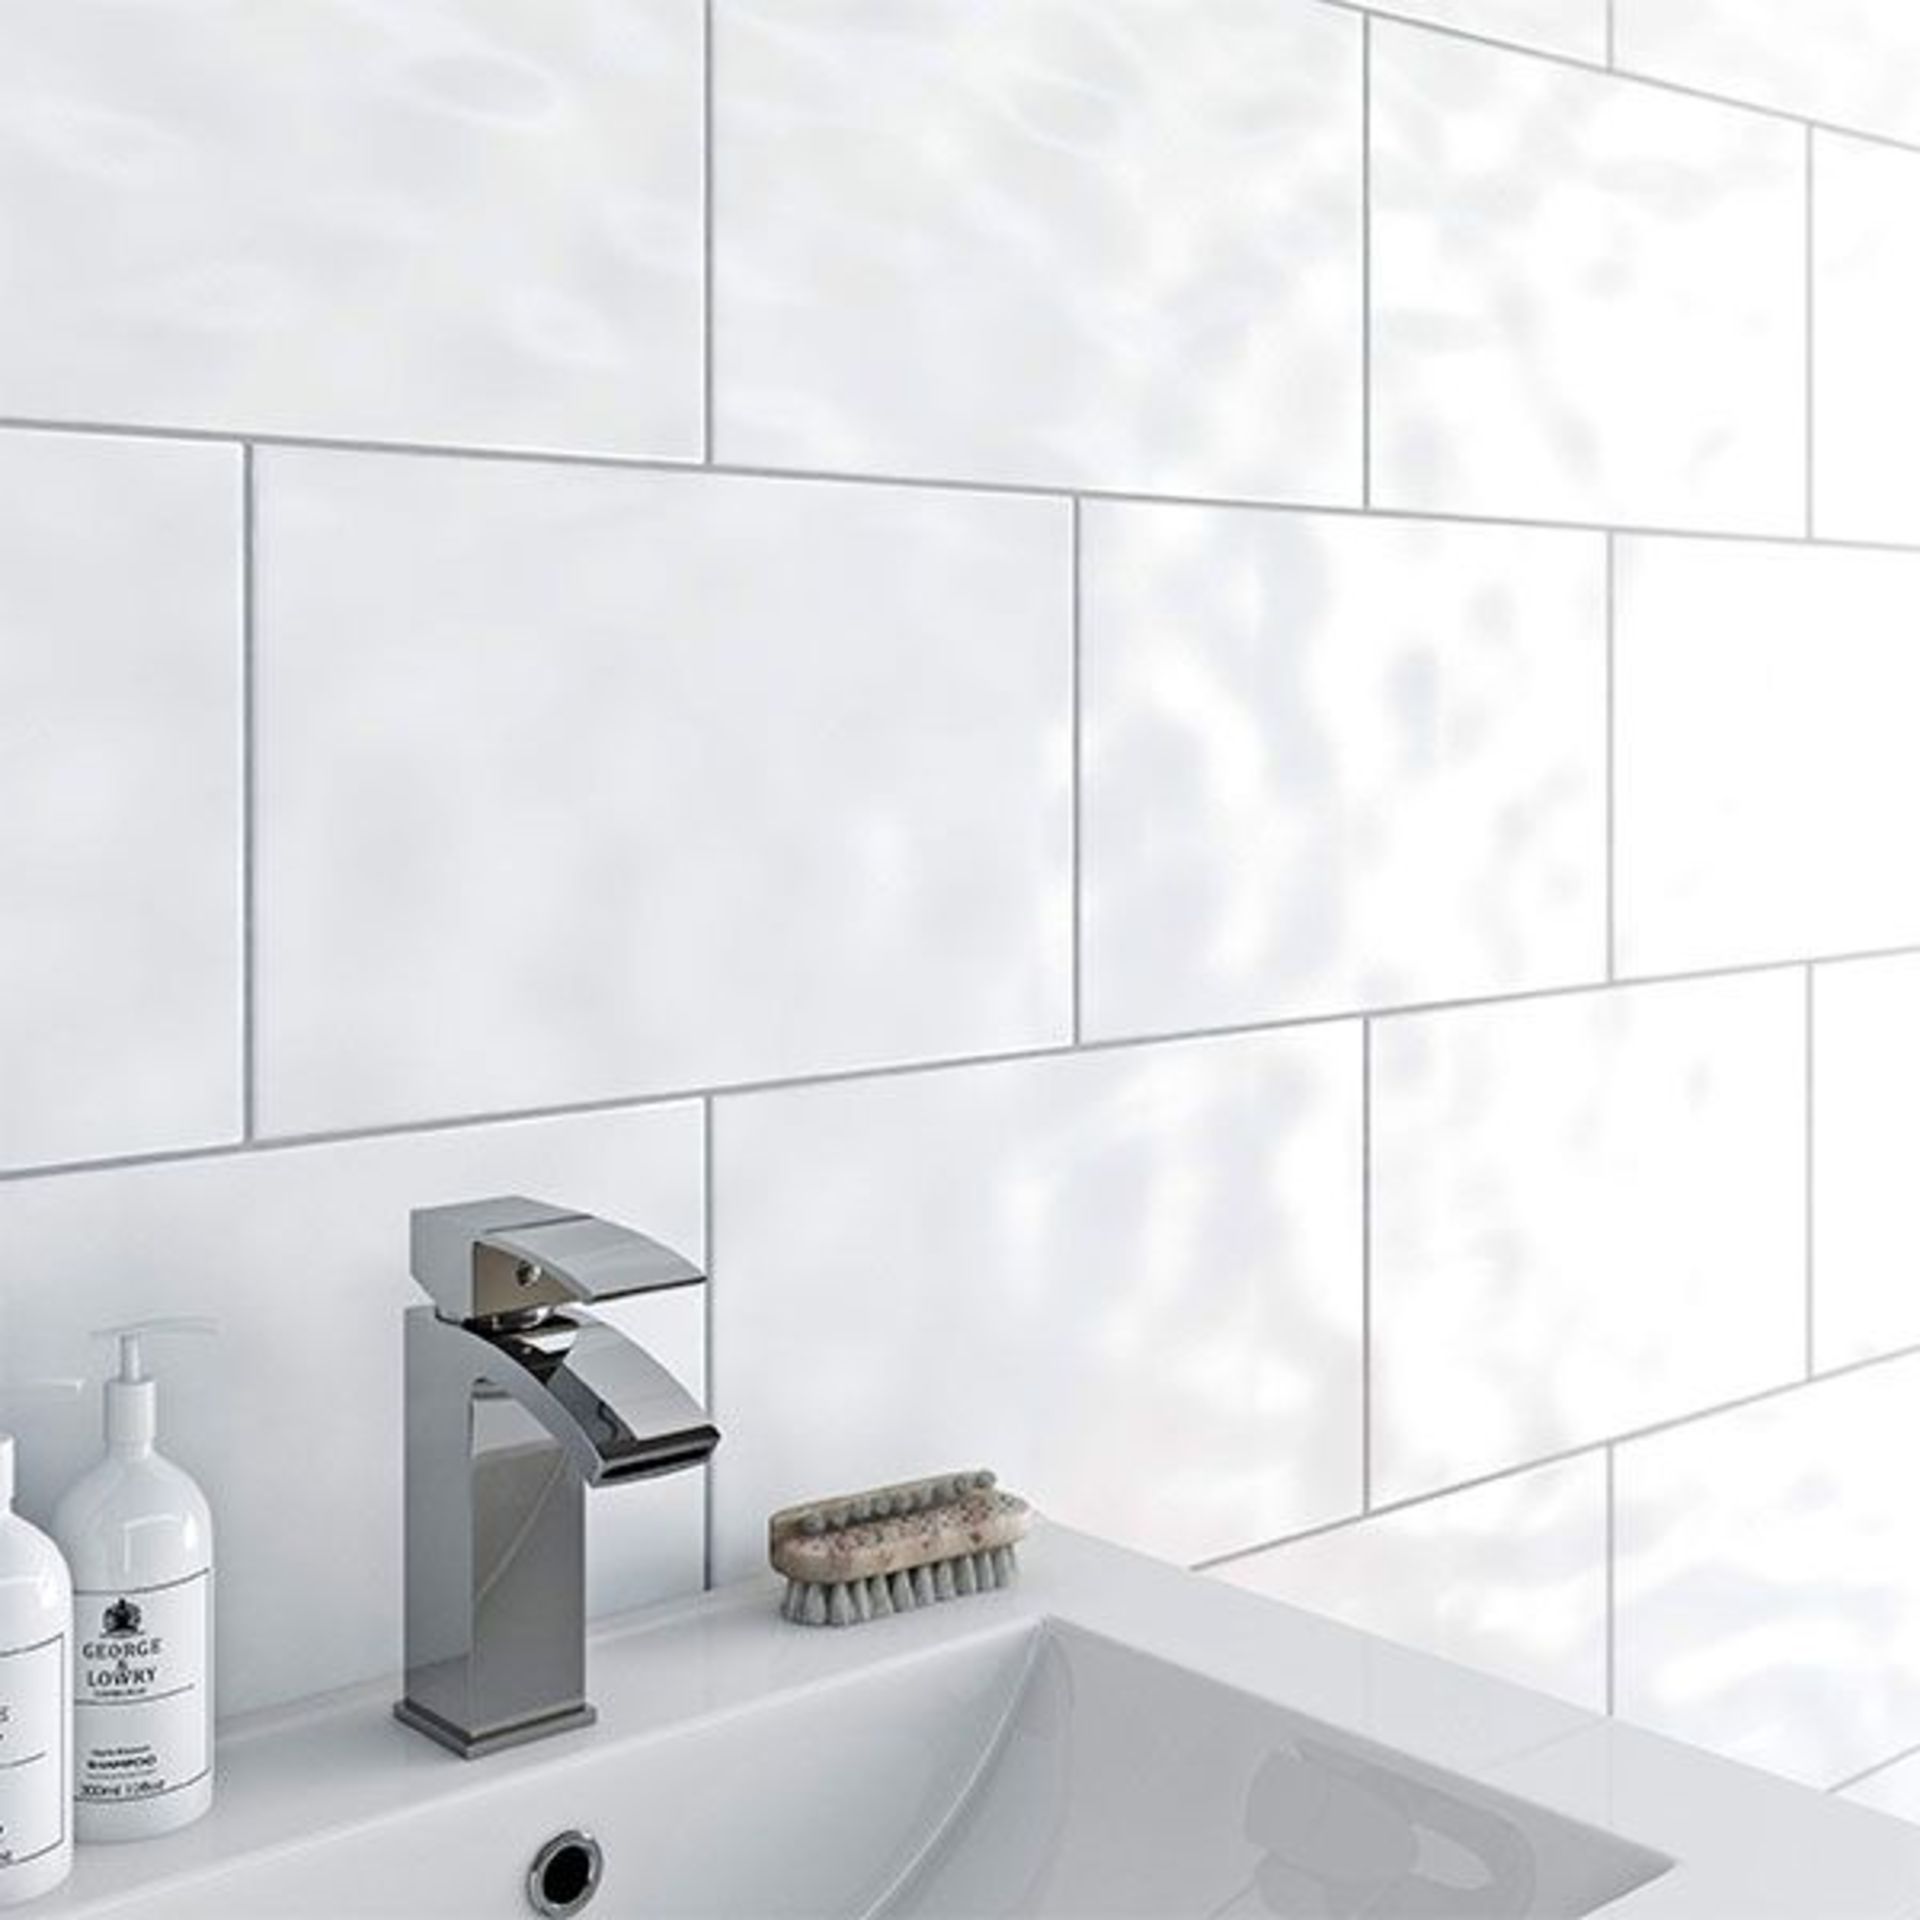 7.5m2 Ceramic White Wall Tiles. 250x500mm per tile. Wall tiles are one the best ways to get a ... - Image 2 of 2